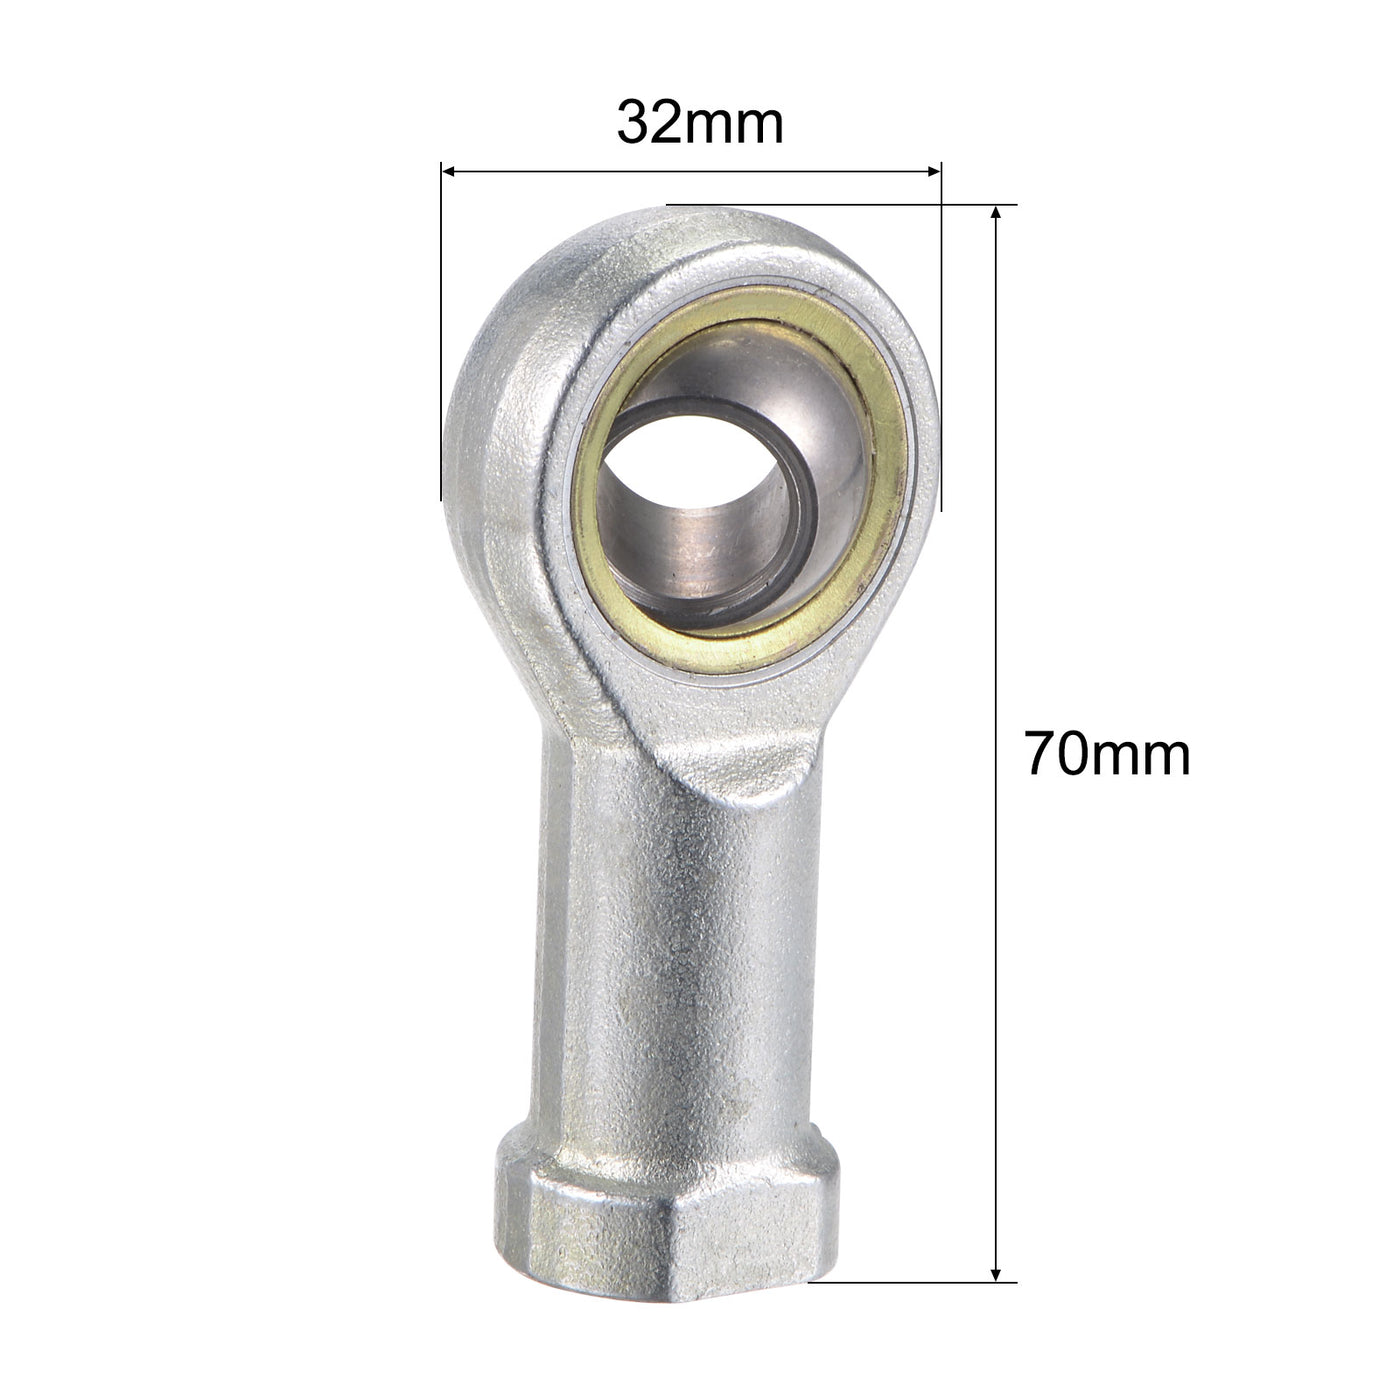 uxcell Uxcell SI12TK PHSA12 Rod End Bearing 12mm Bore M12x1.75 Left Hand Female Thread